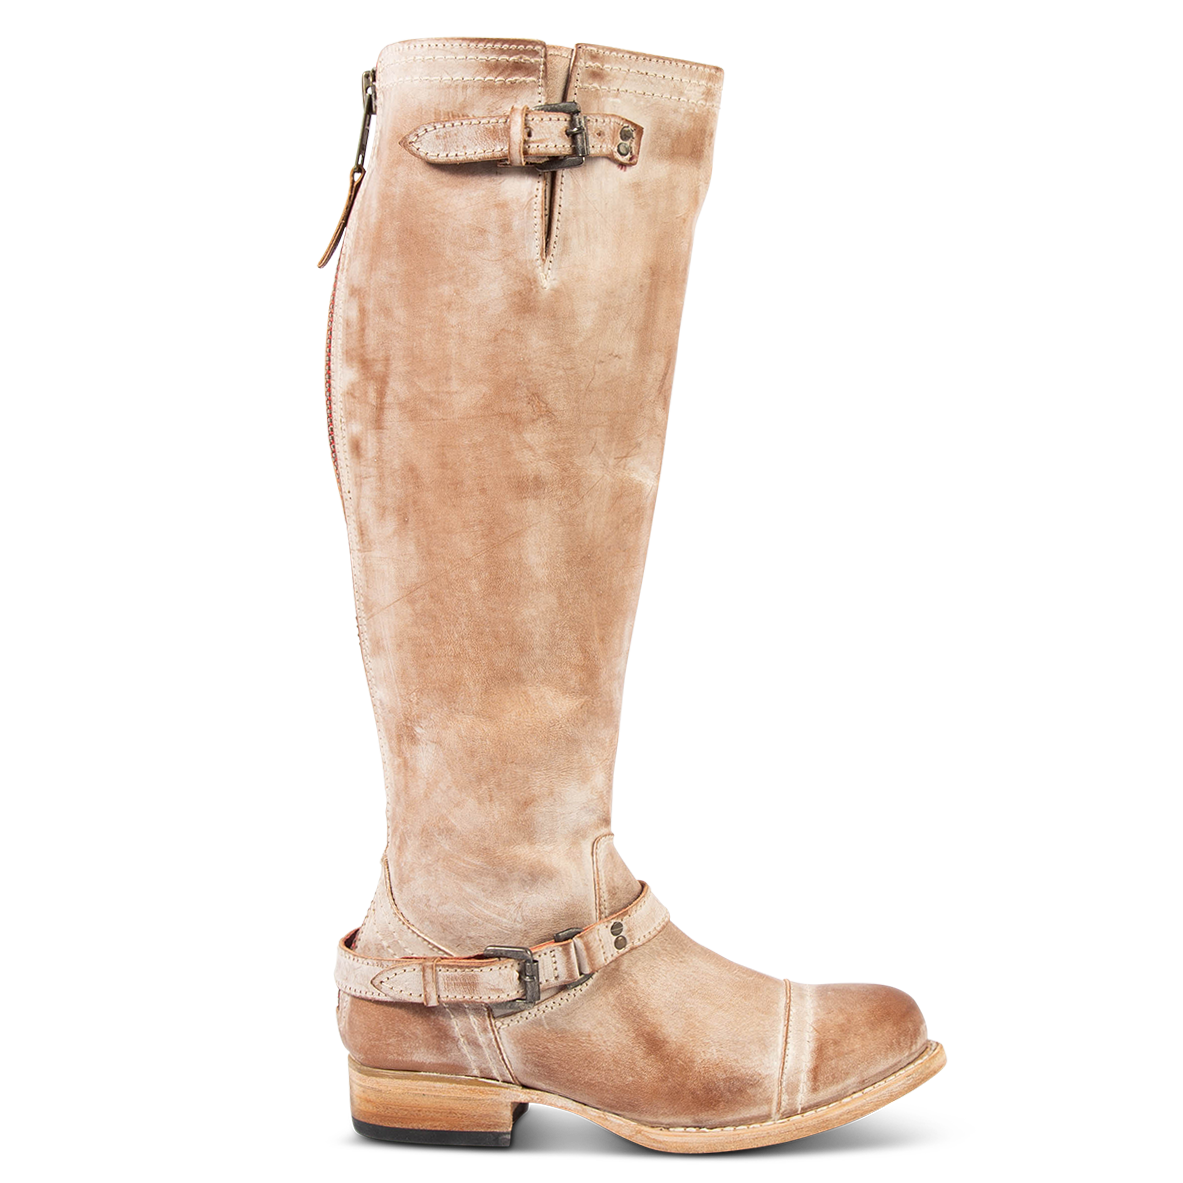 FREEBIRD women's Roadey taupe tall construction boot with double buckle detailing and signature red tracked zipper